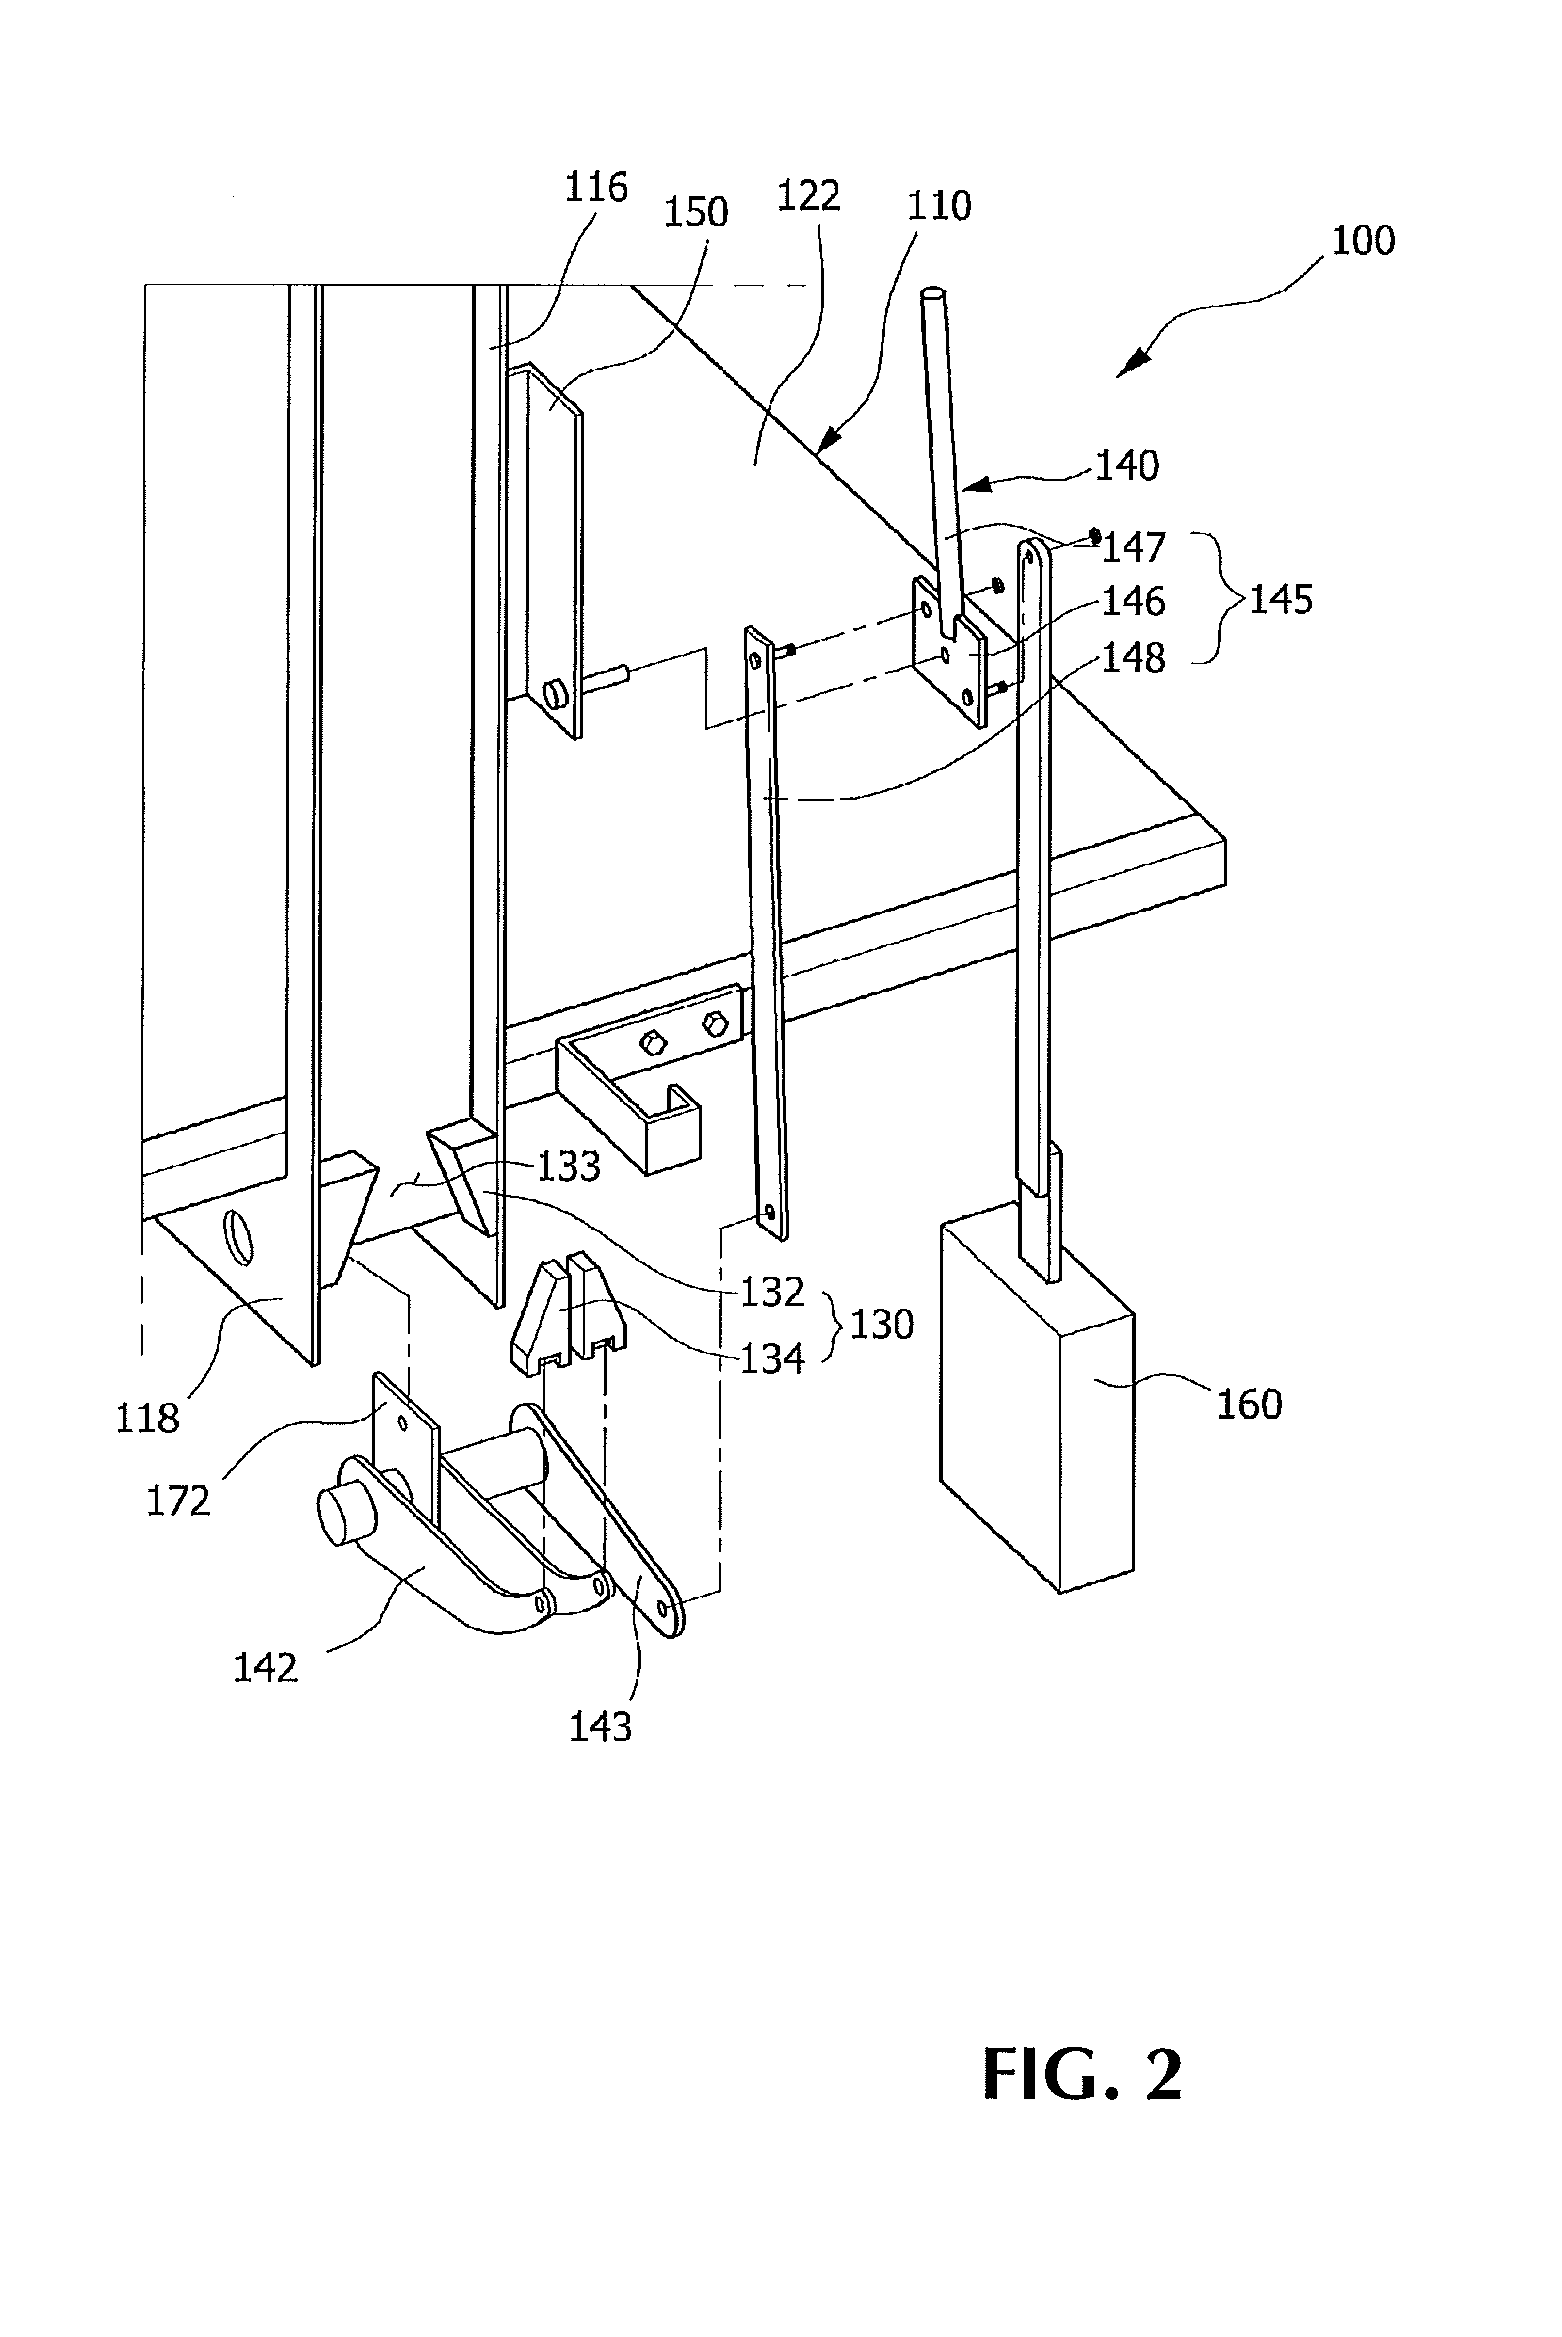 Emergency stop device with attached hand brake system